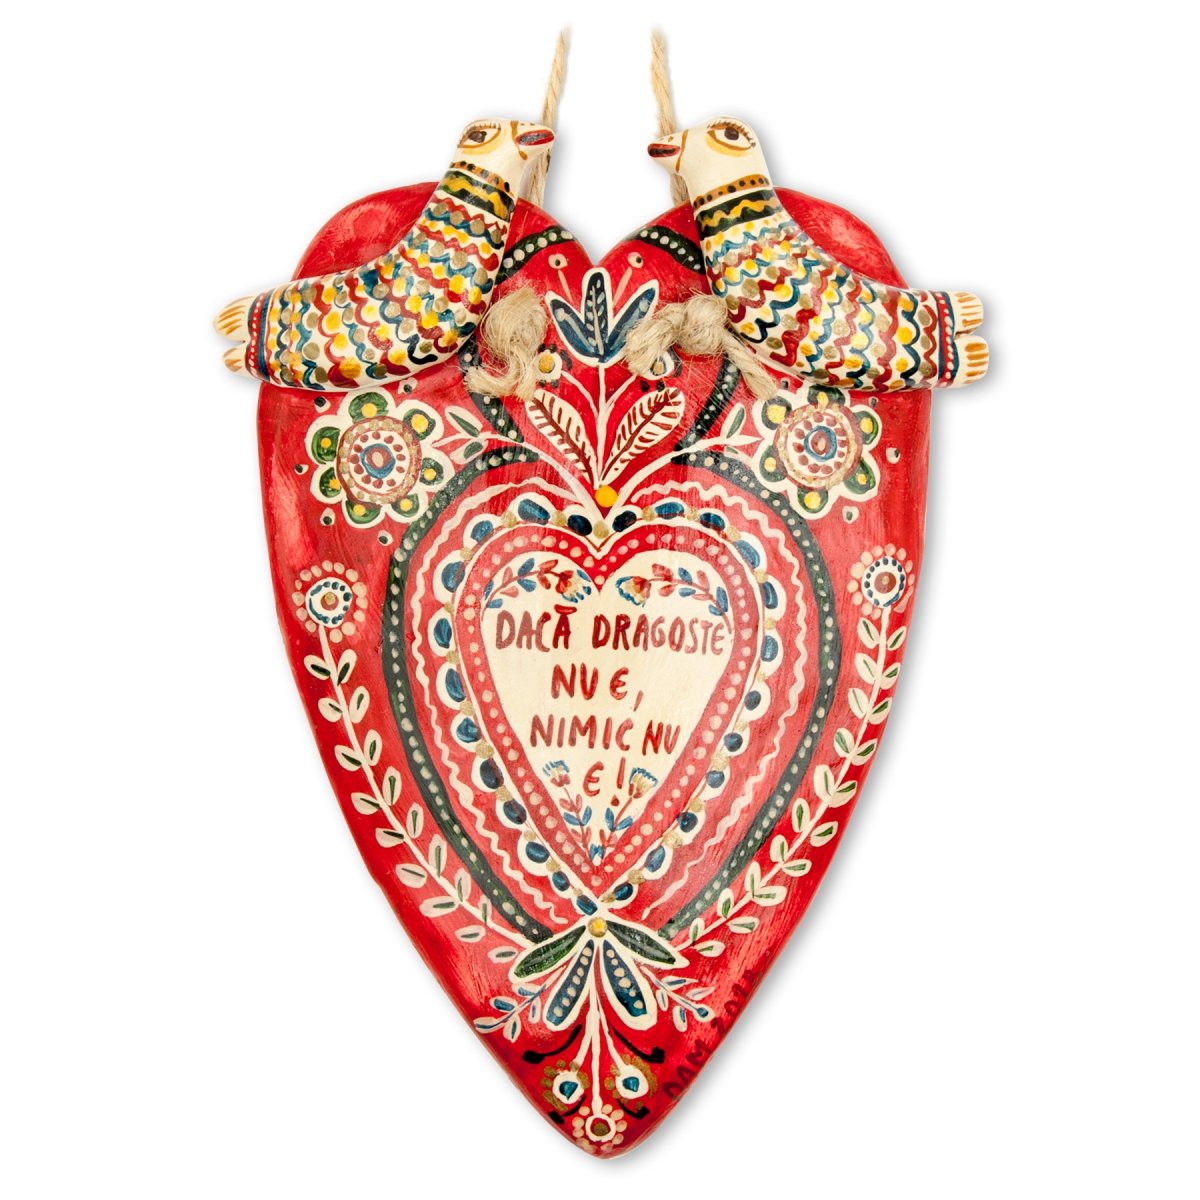 Modeling clay flat heart figurine, "If love is gone, all is lost", 10x13,5 cm